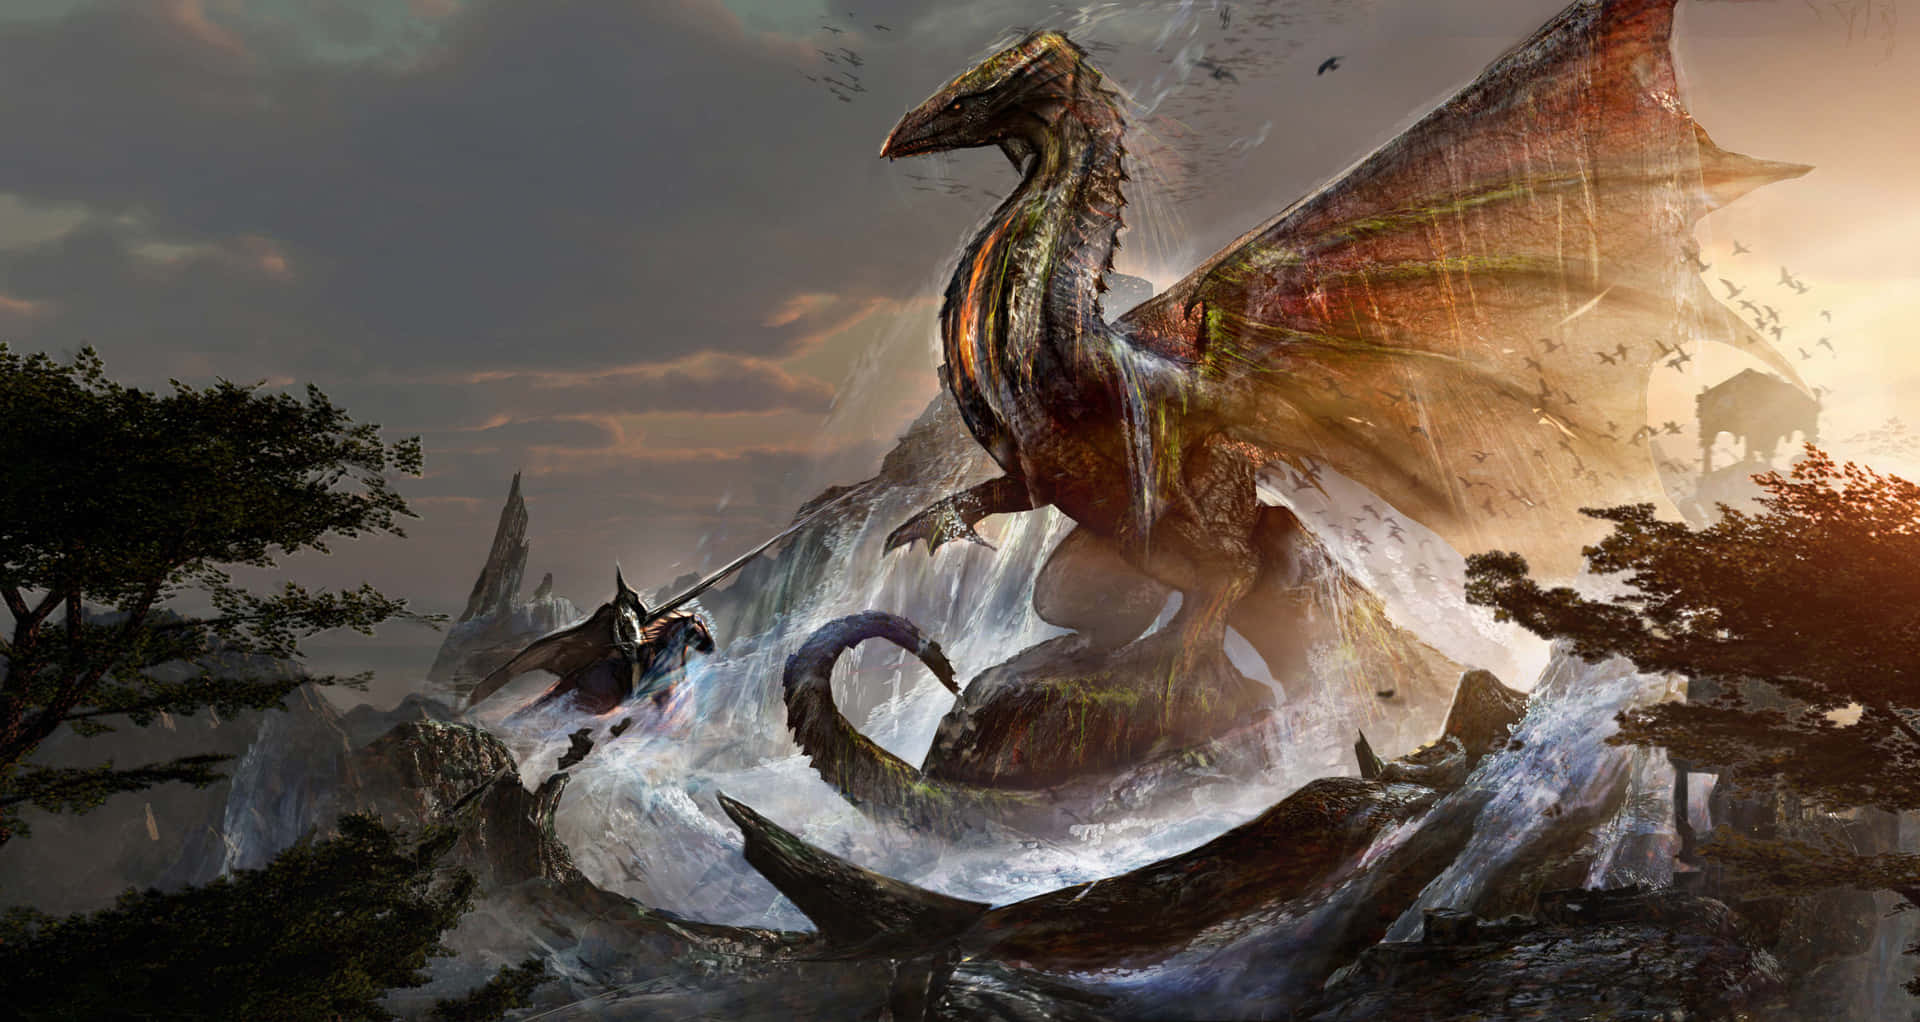 "The fiery breath of a mythic dragon envelops an unsuspecting town." Wallpaper